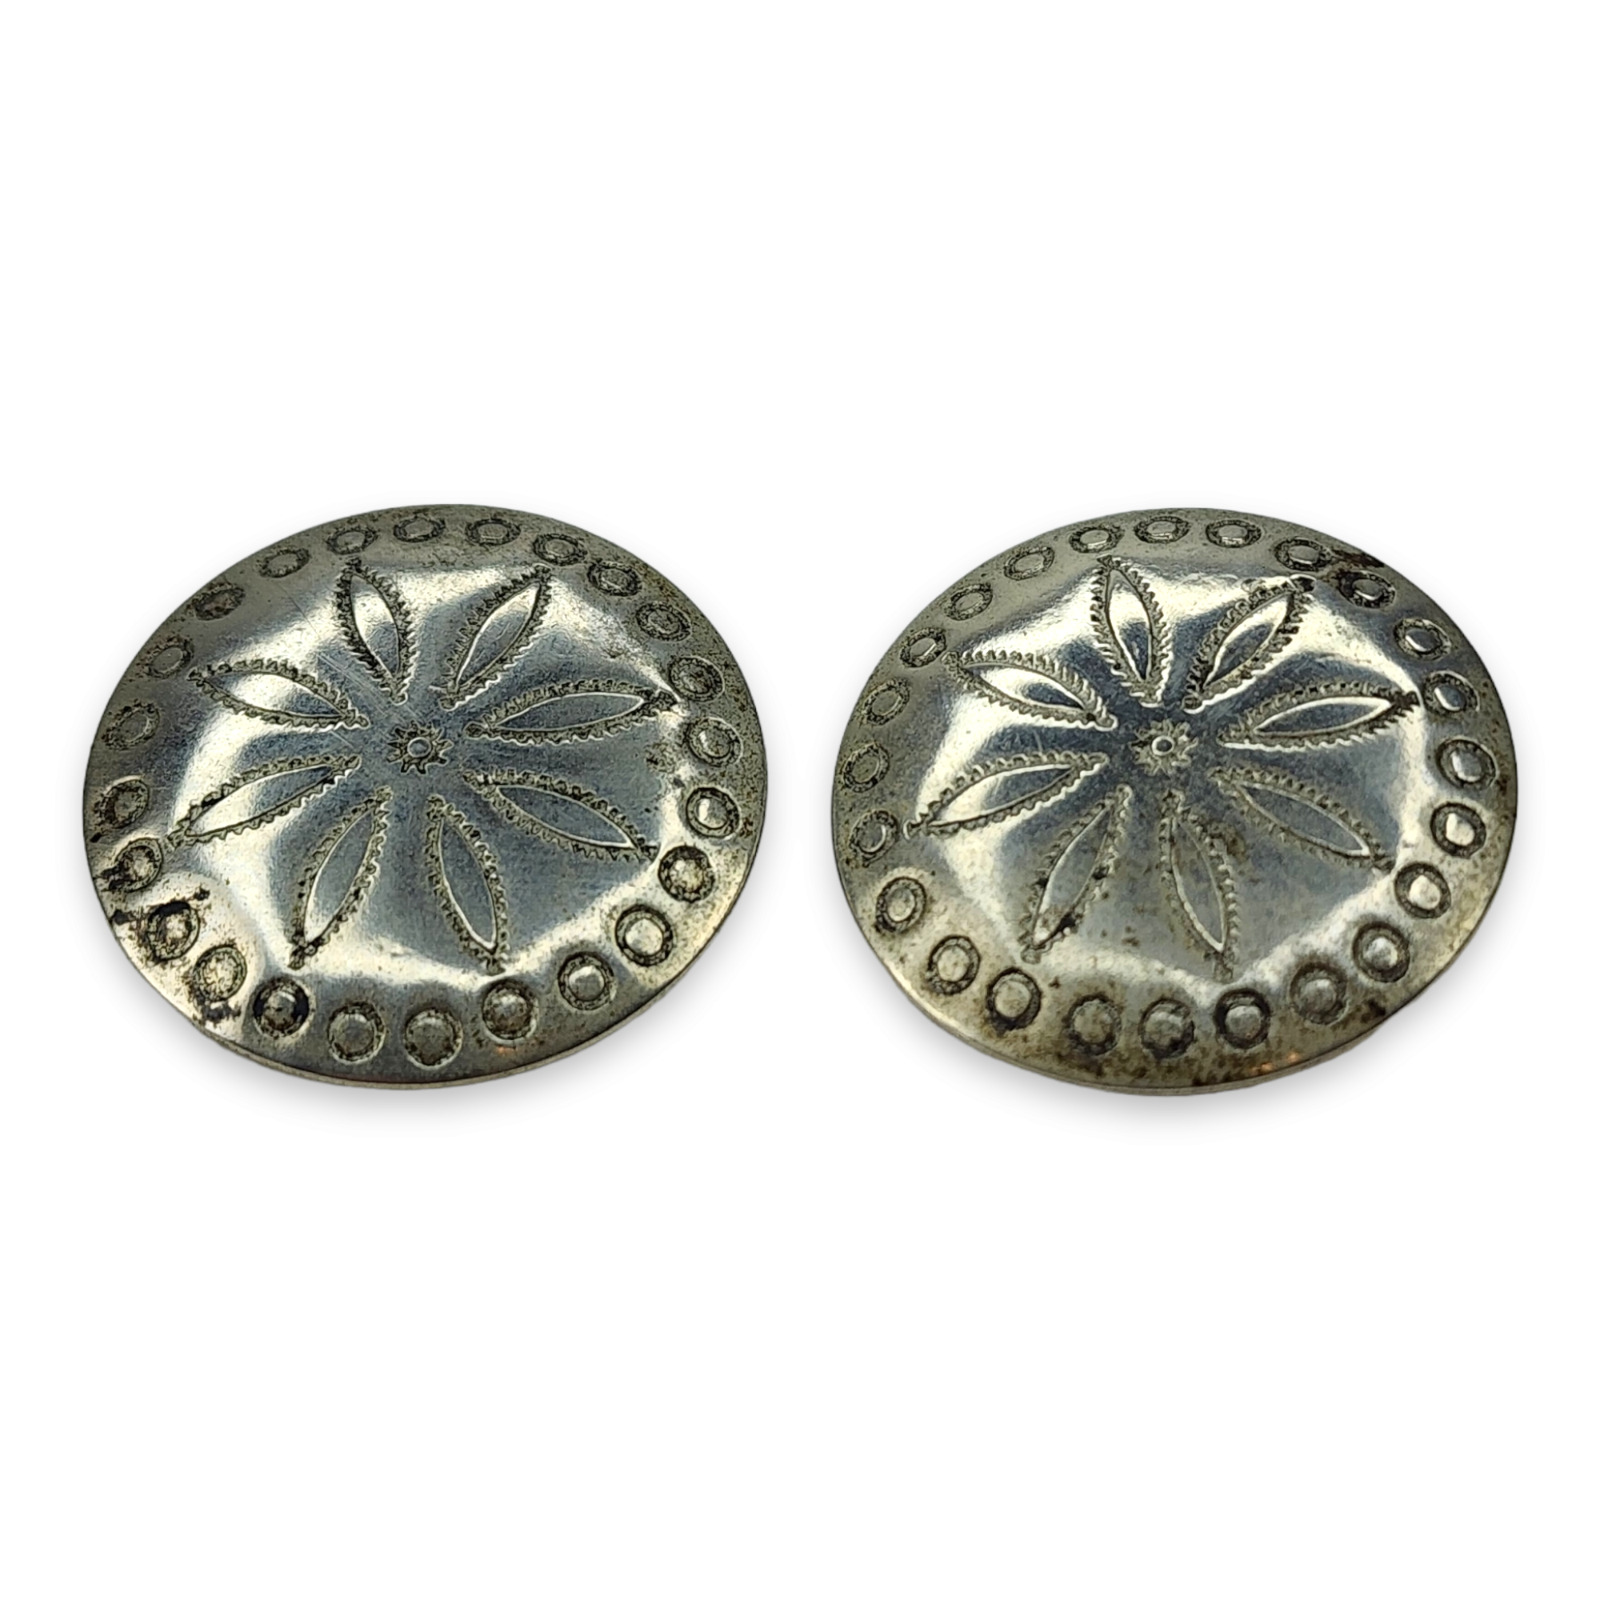 Vintage Southwestern Navajo Nickel Silver Concho Buttons Set of Two